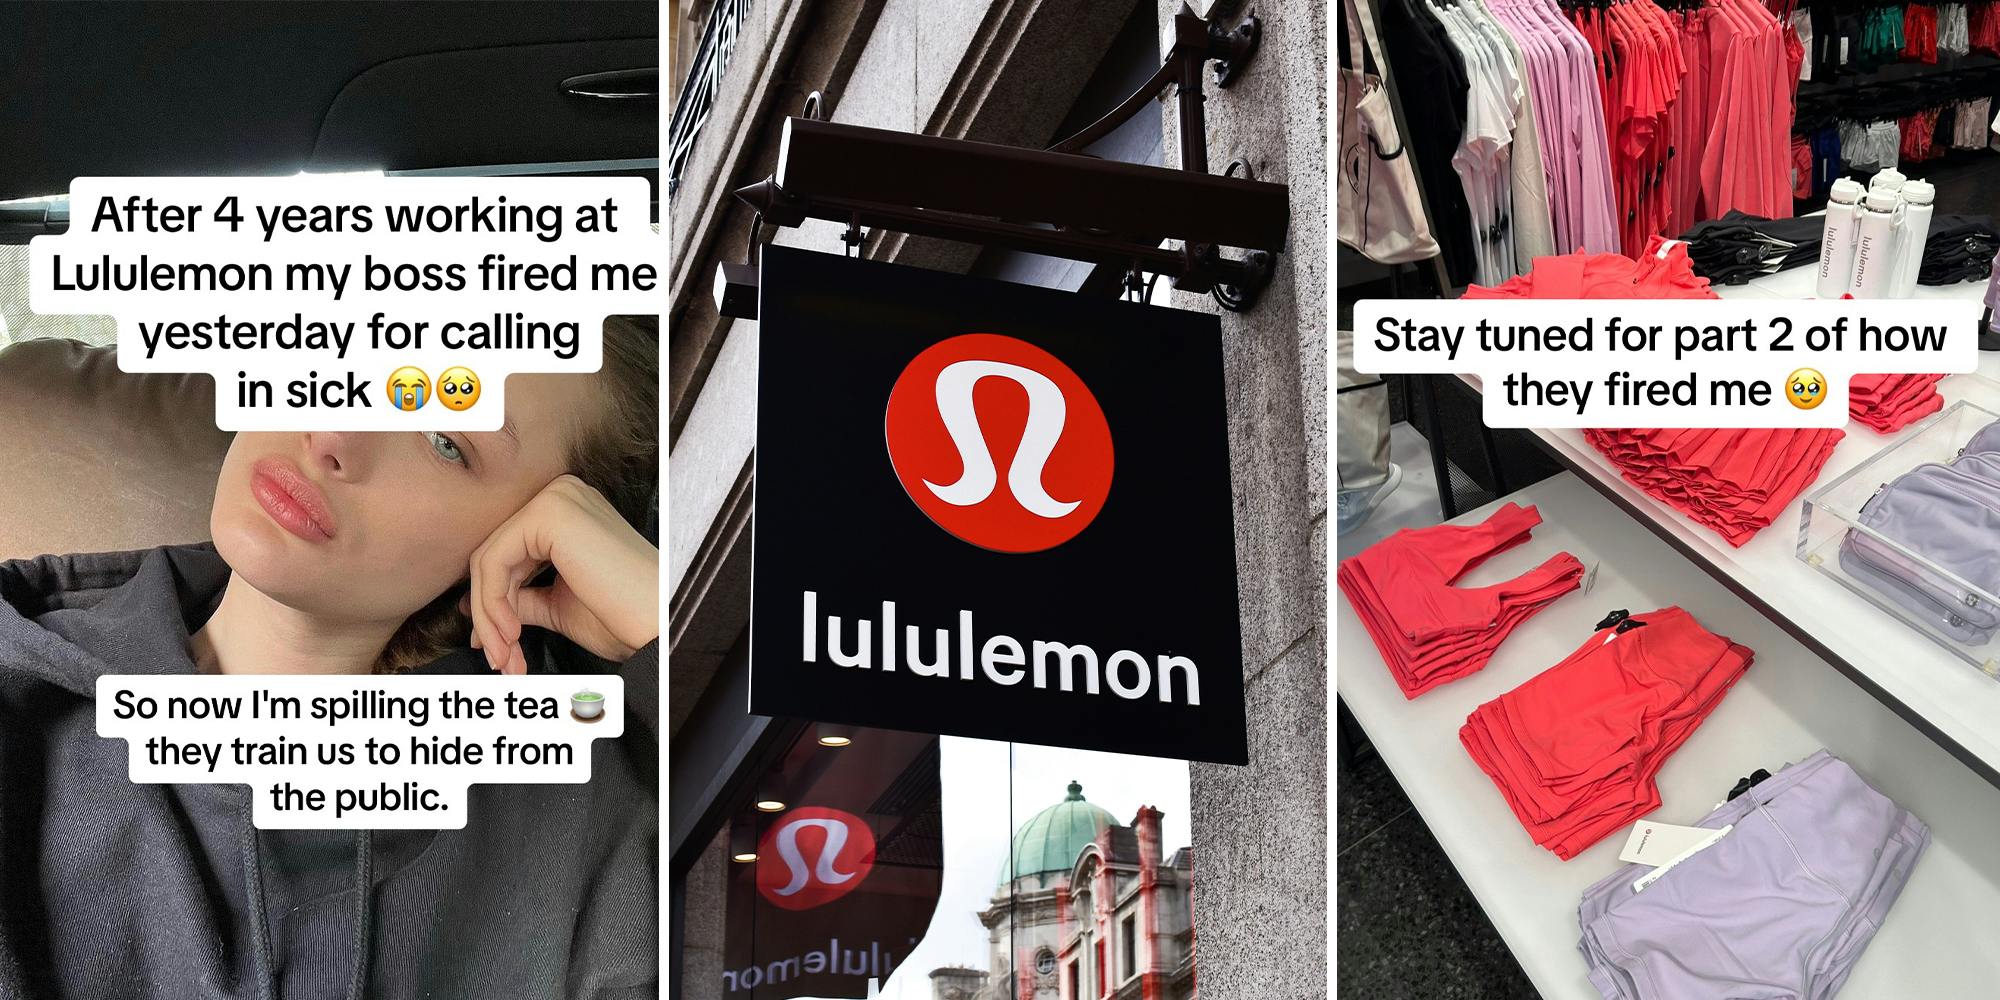 Lululemon worker gets suddenly fired after 4 years. So she reveals the secret weekly sale